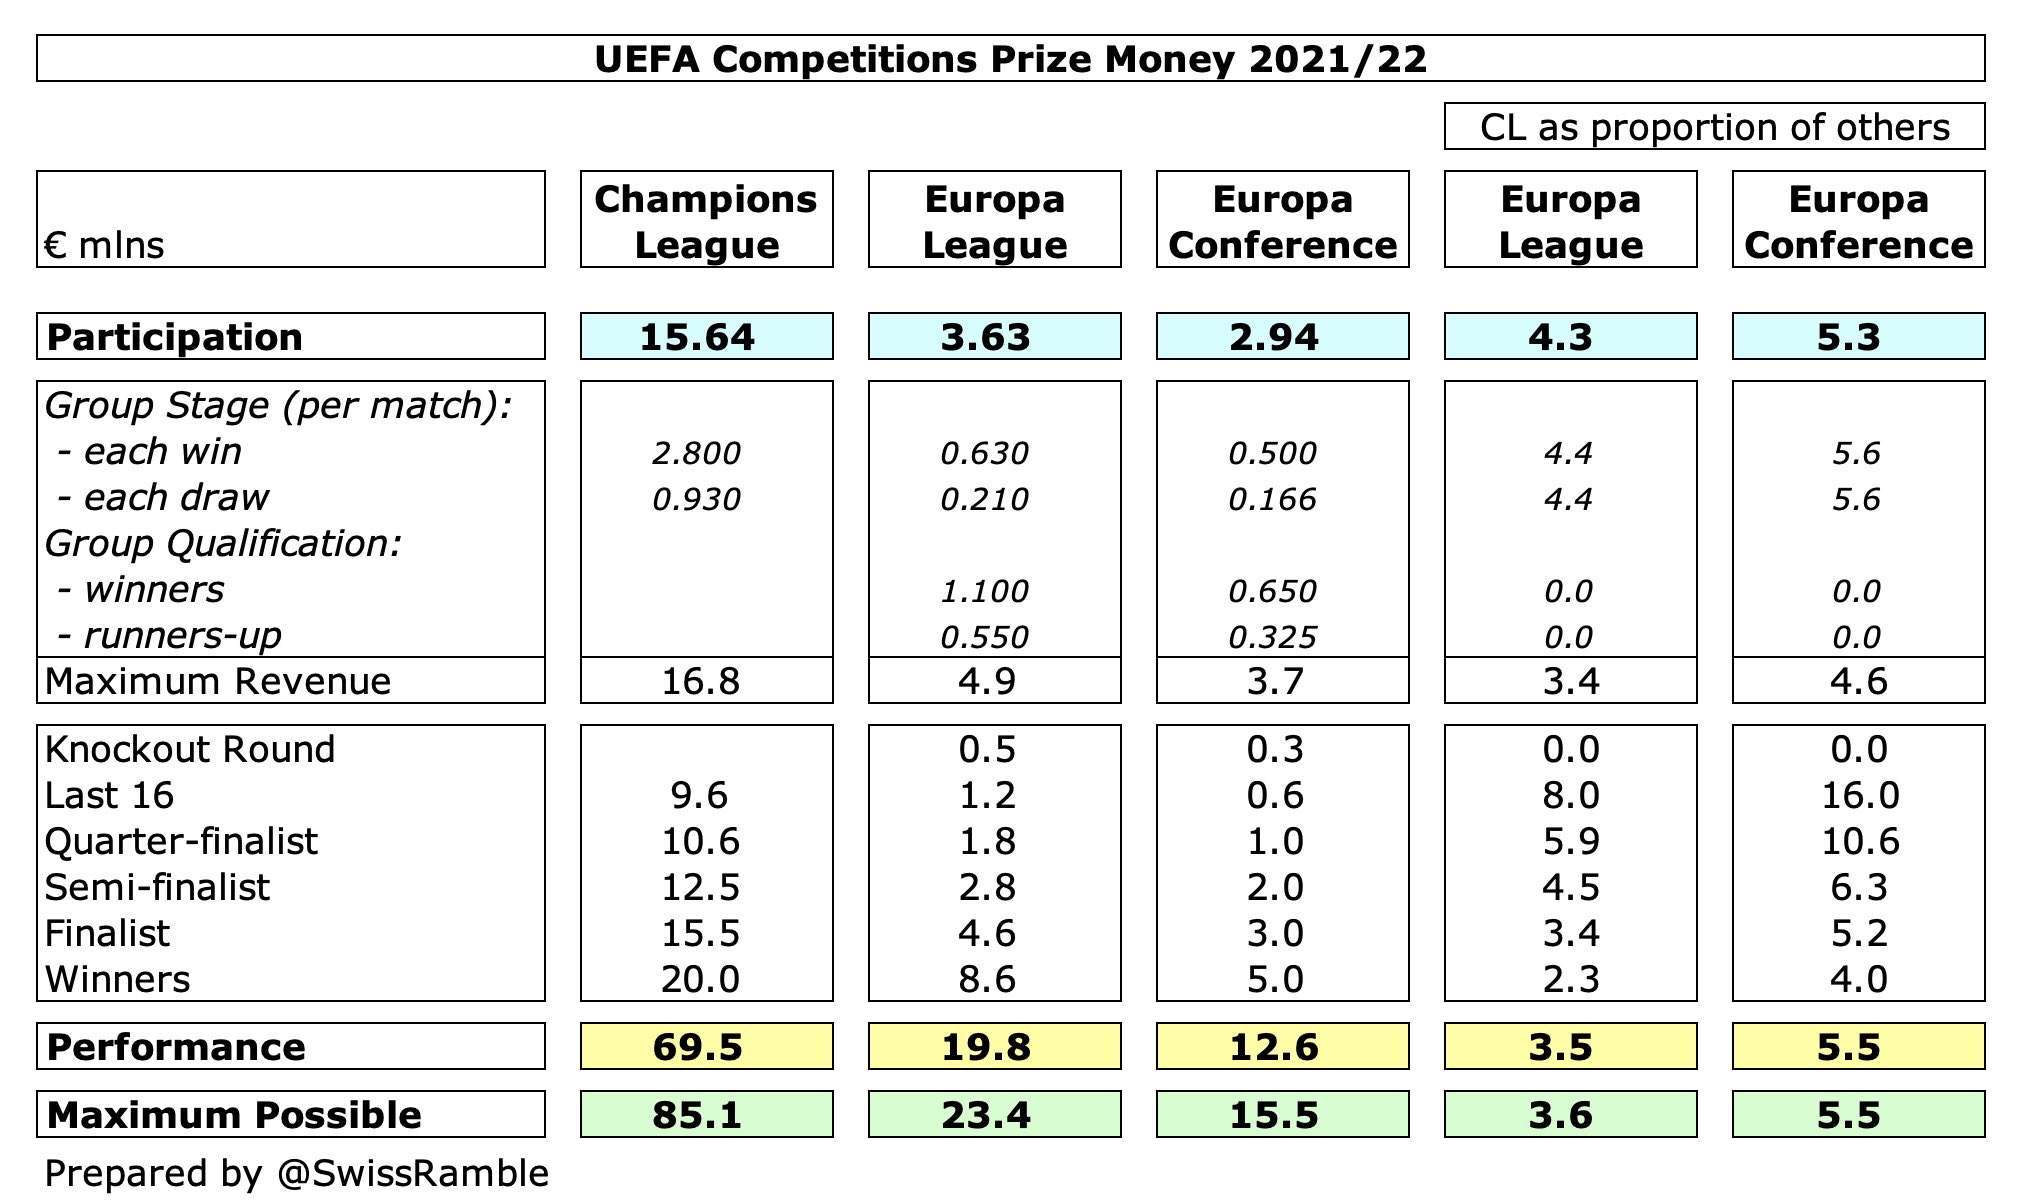 Swiss Ramble on Twitter: "Champions League overall prize money is 3.6 times  the Europa League and 5.5 times the Europa Conference, but this varies by  round. In general, the difference becomes smaller